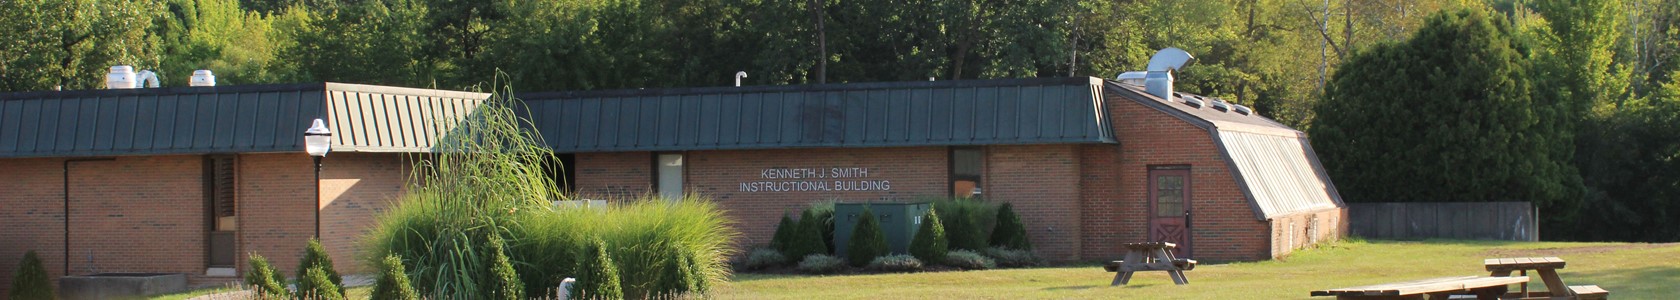 MCC's Sidney campus, Kenneth J. Smith Instructional Building